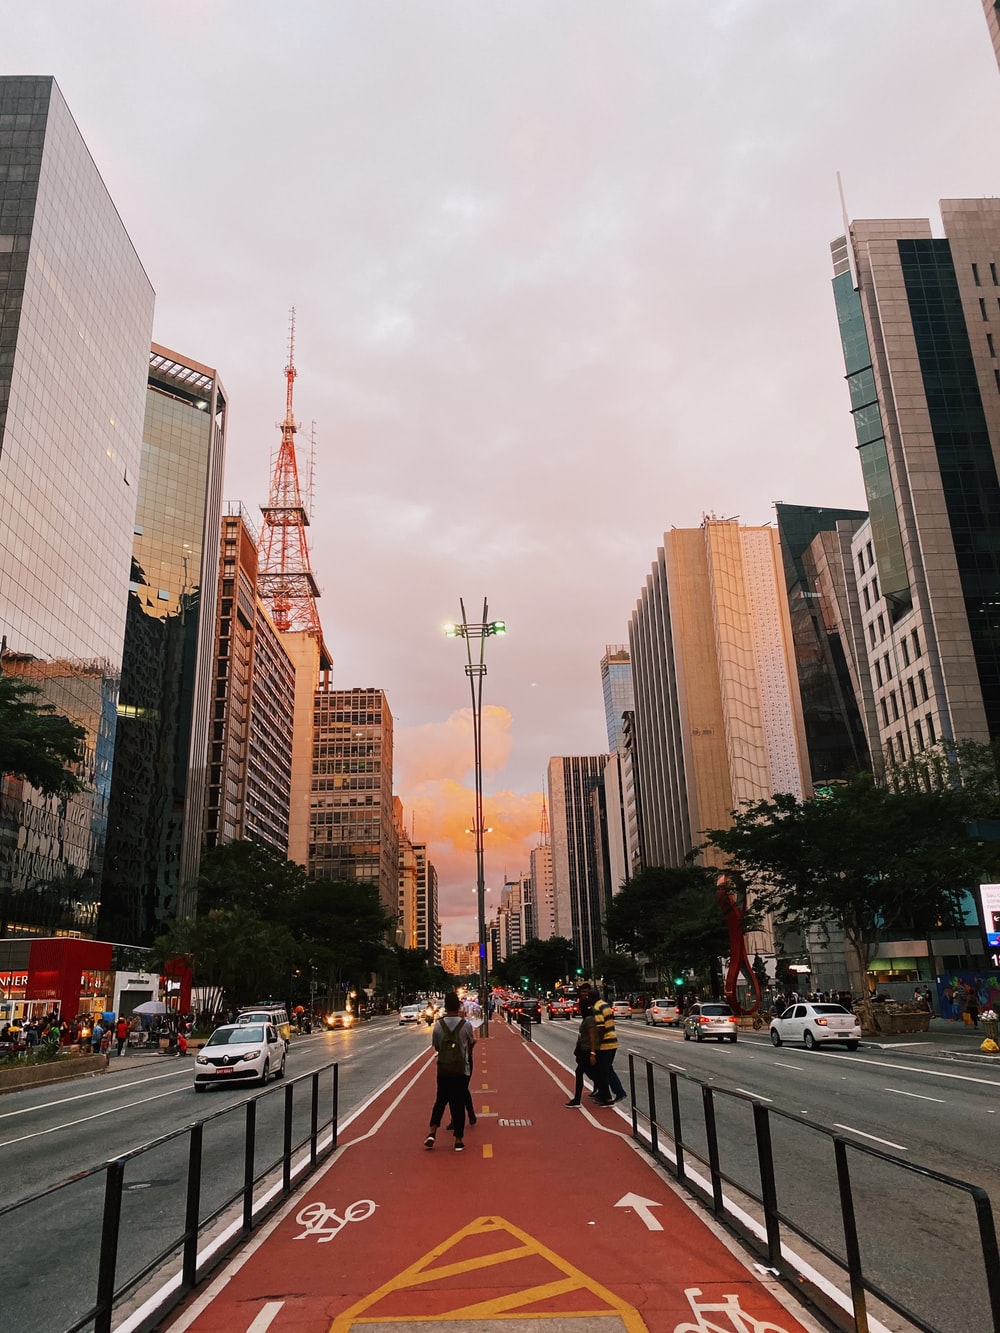 Sao Paulo Picture. Download Free Image